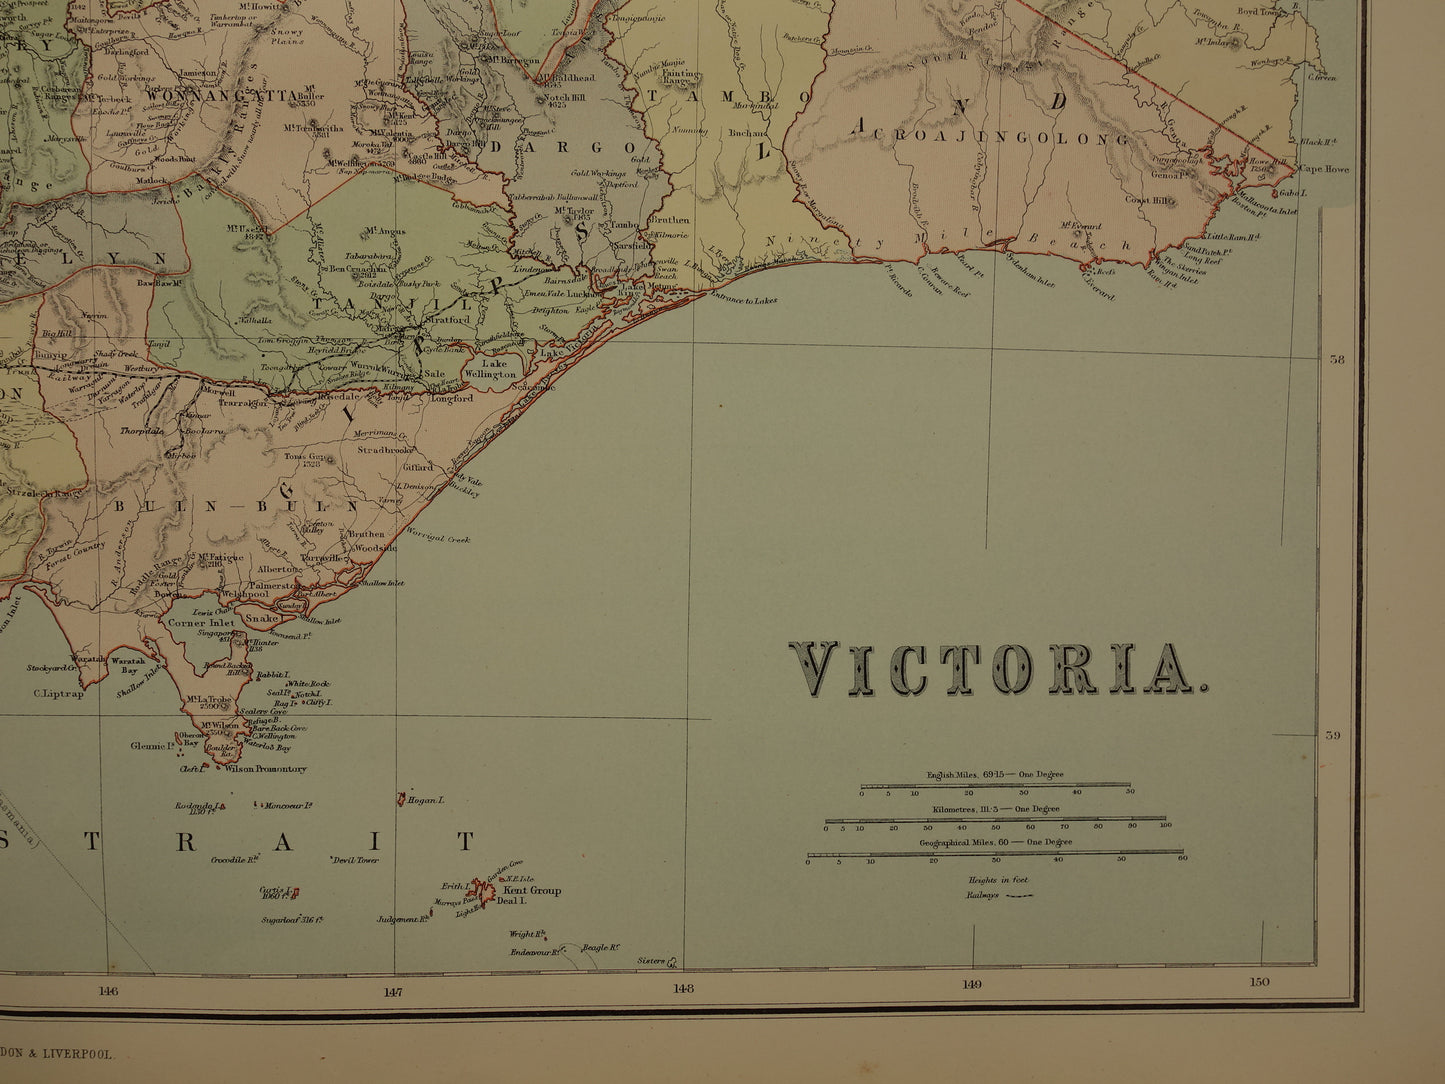 Victoria state Australia antique map from 1890